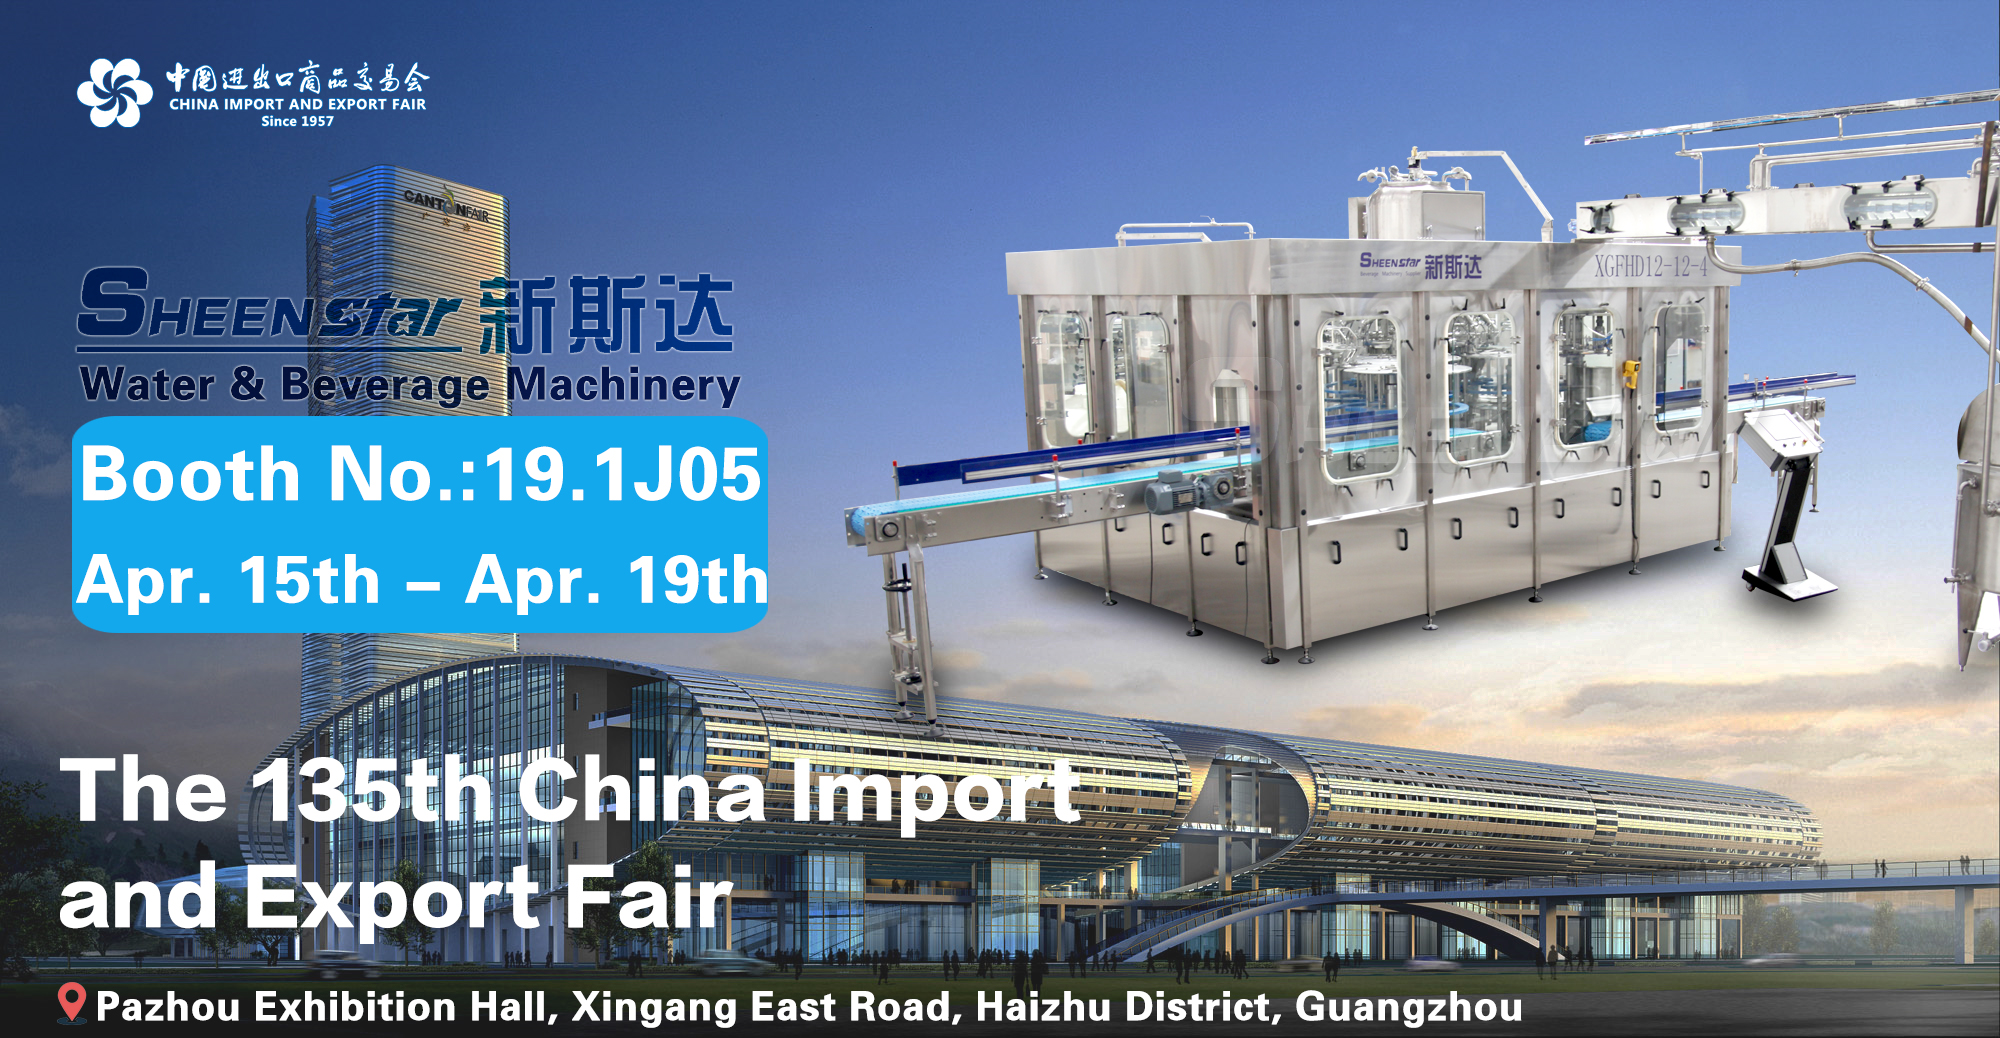 To Meet SHEENSTAR in The 135th China Import and Export Fair